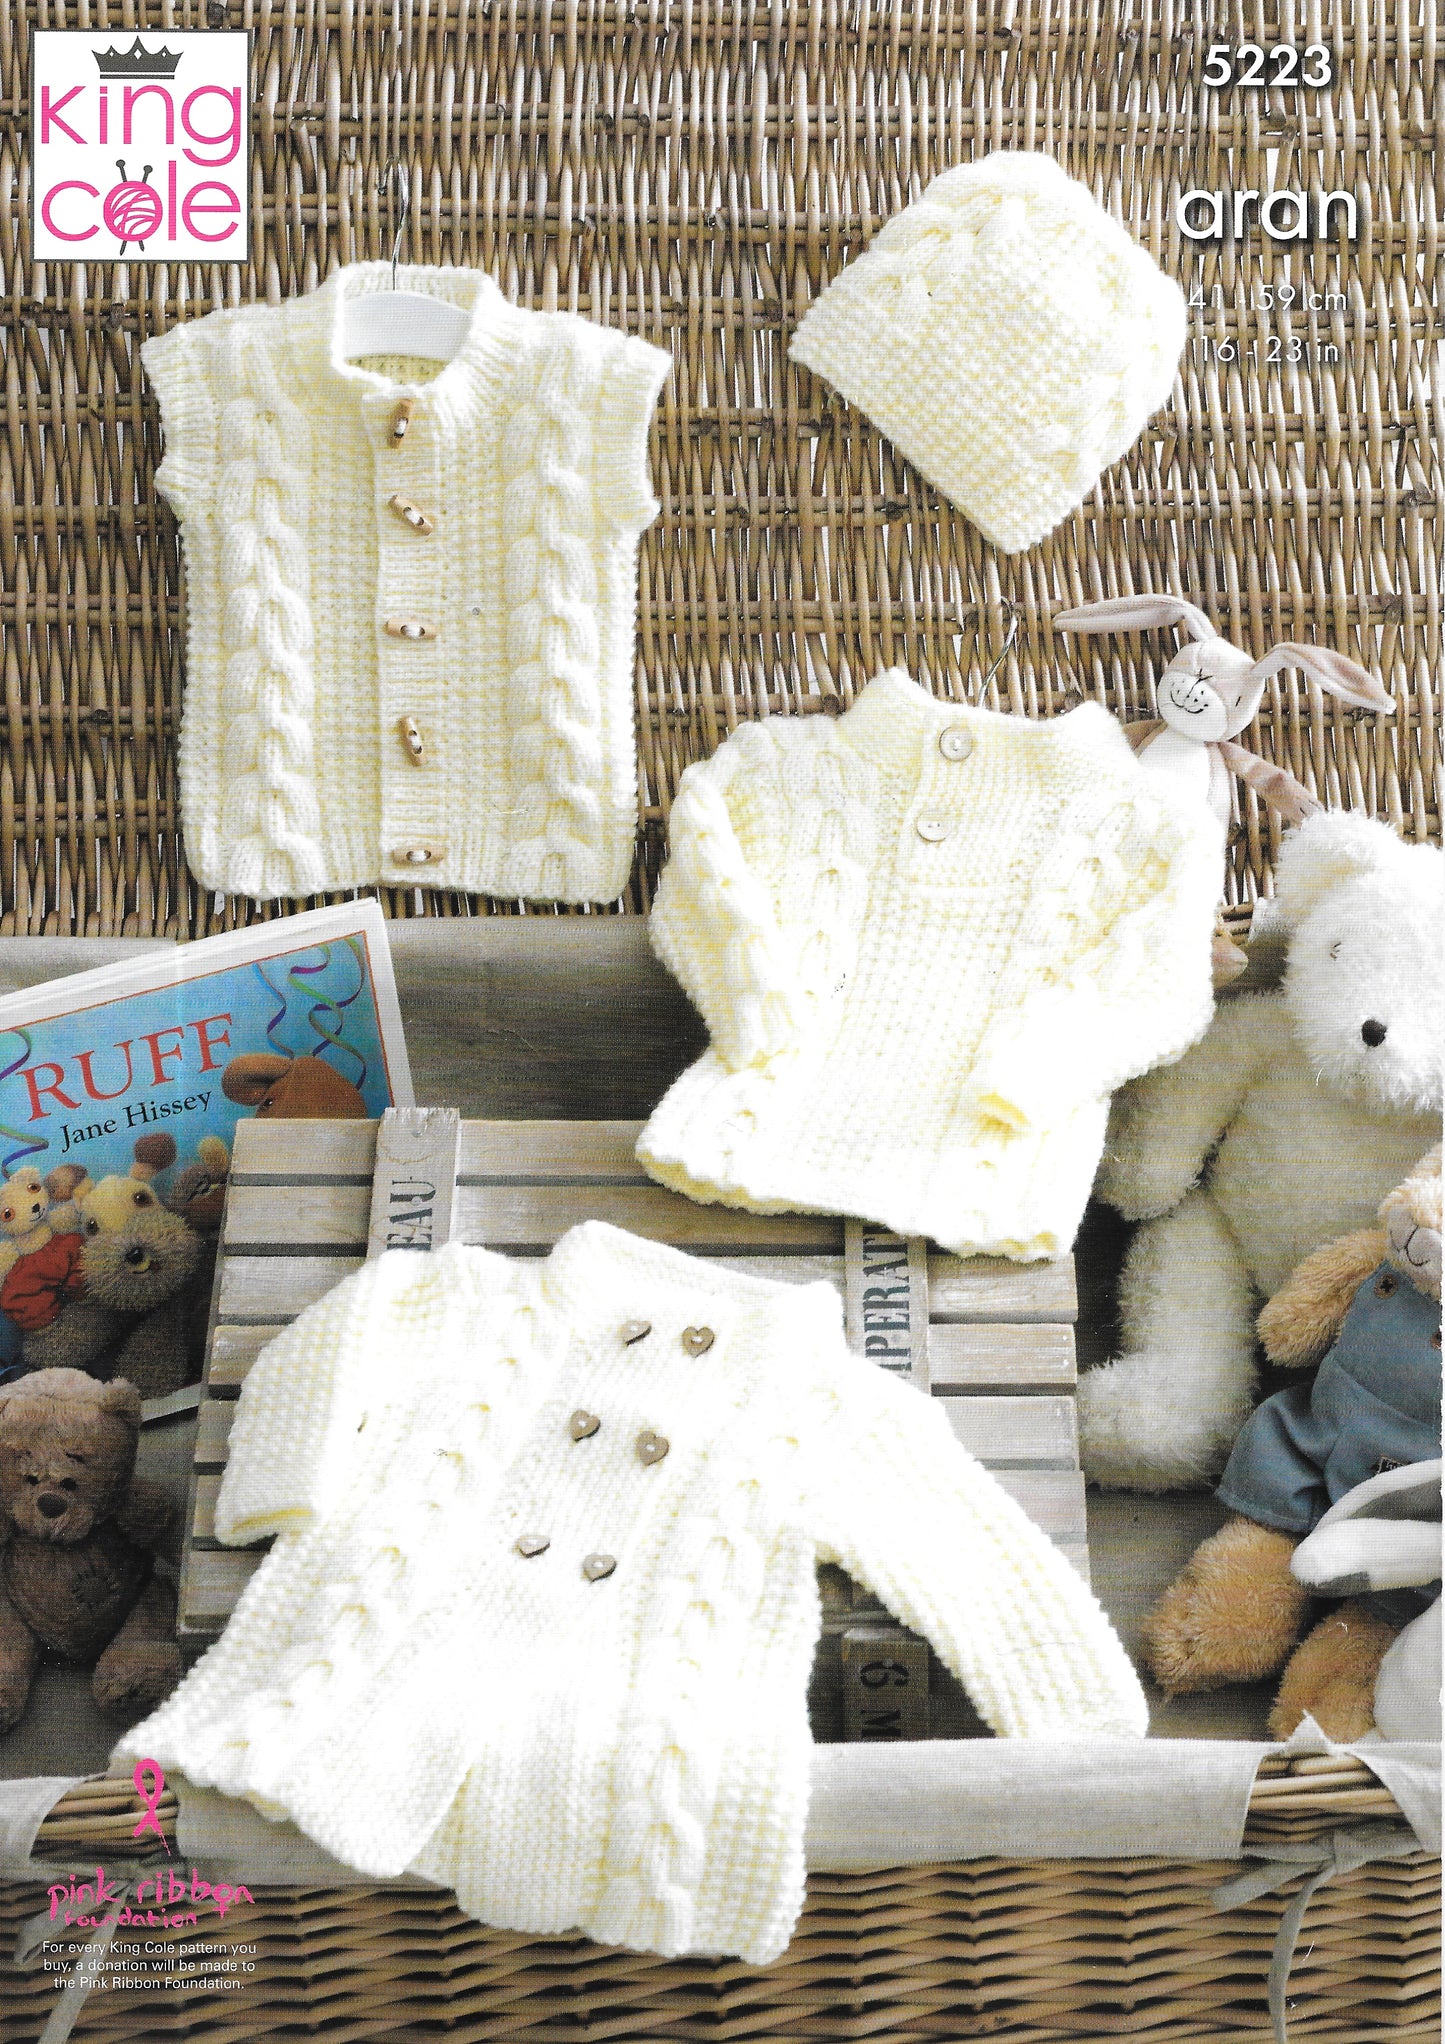 PRELOVED King Cole Knitting Pattern 5223. Child's coat, sweater, gilet and hat. Aran